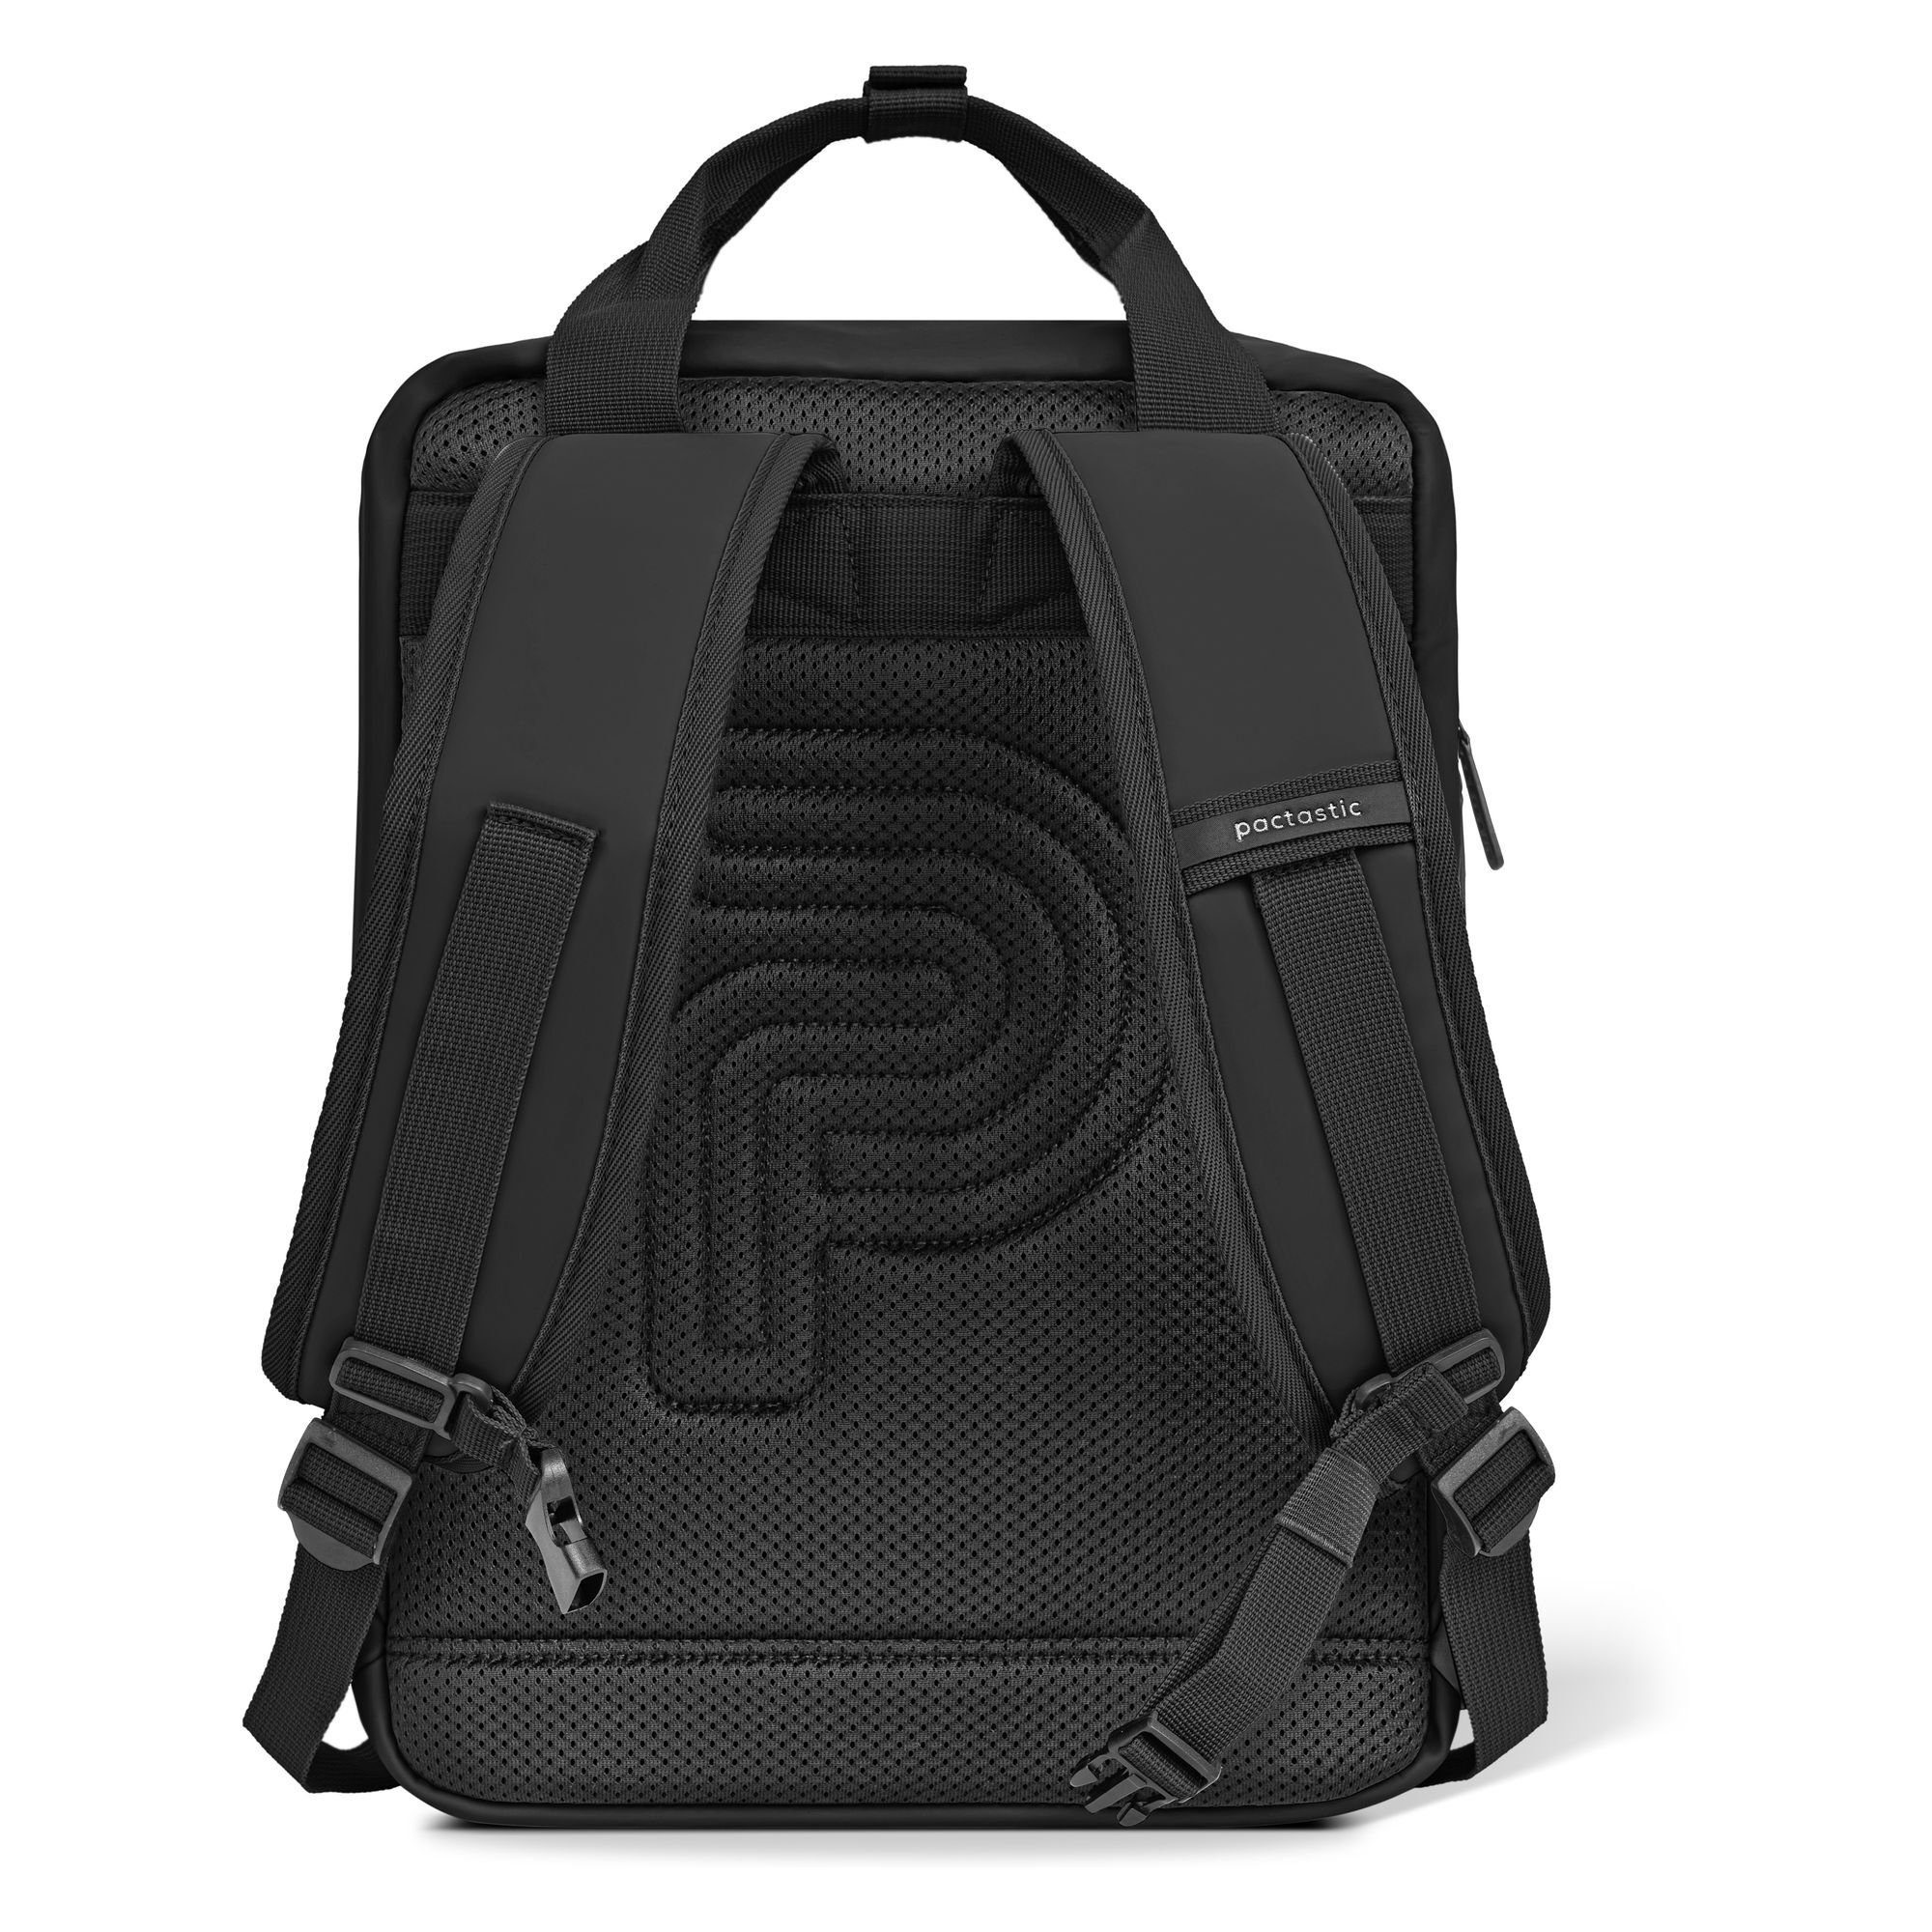 Tech-Material Veganes Pactastic Collection, black Daypack Urban